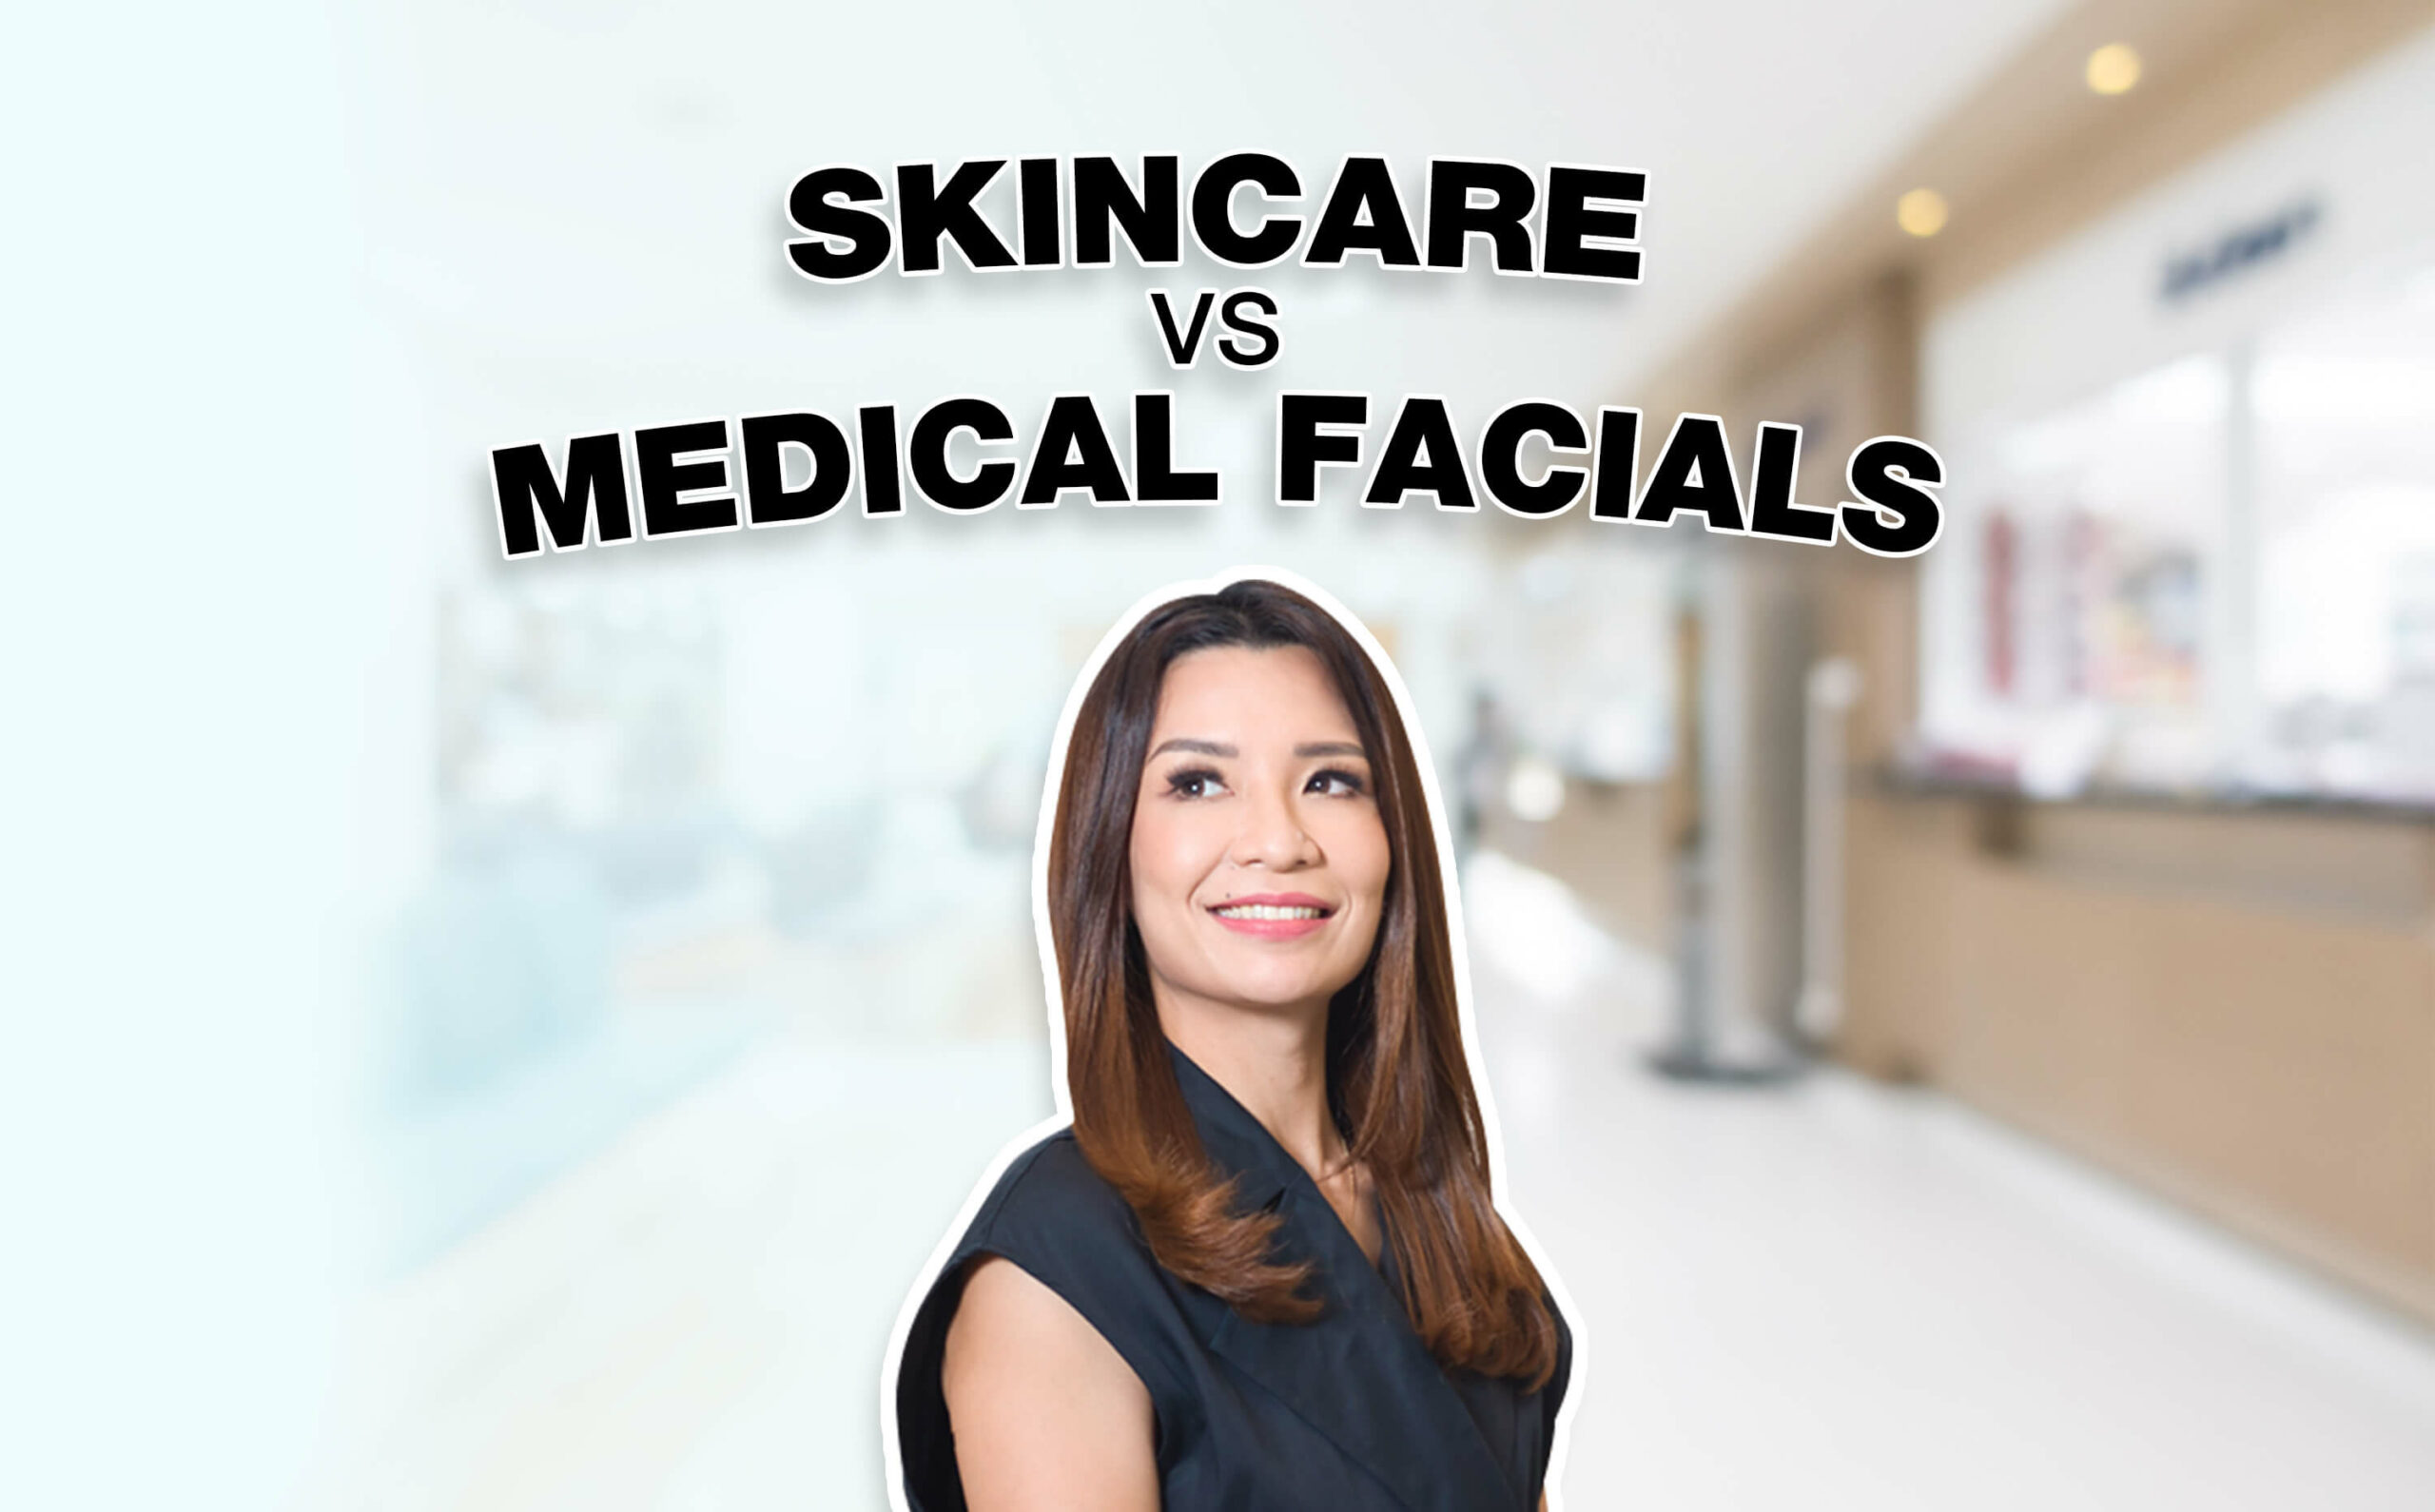 Dr Abby, with the text 'Skincare vs Medical Facials' displayed above her.